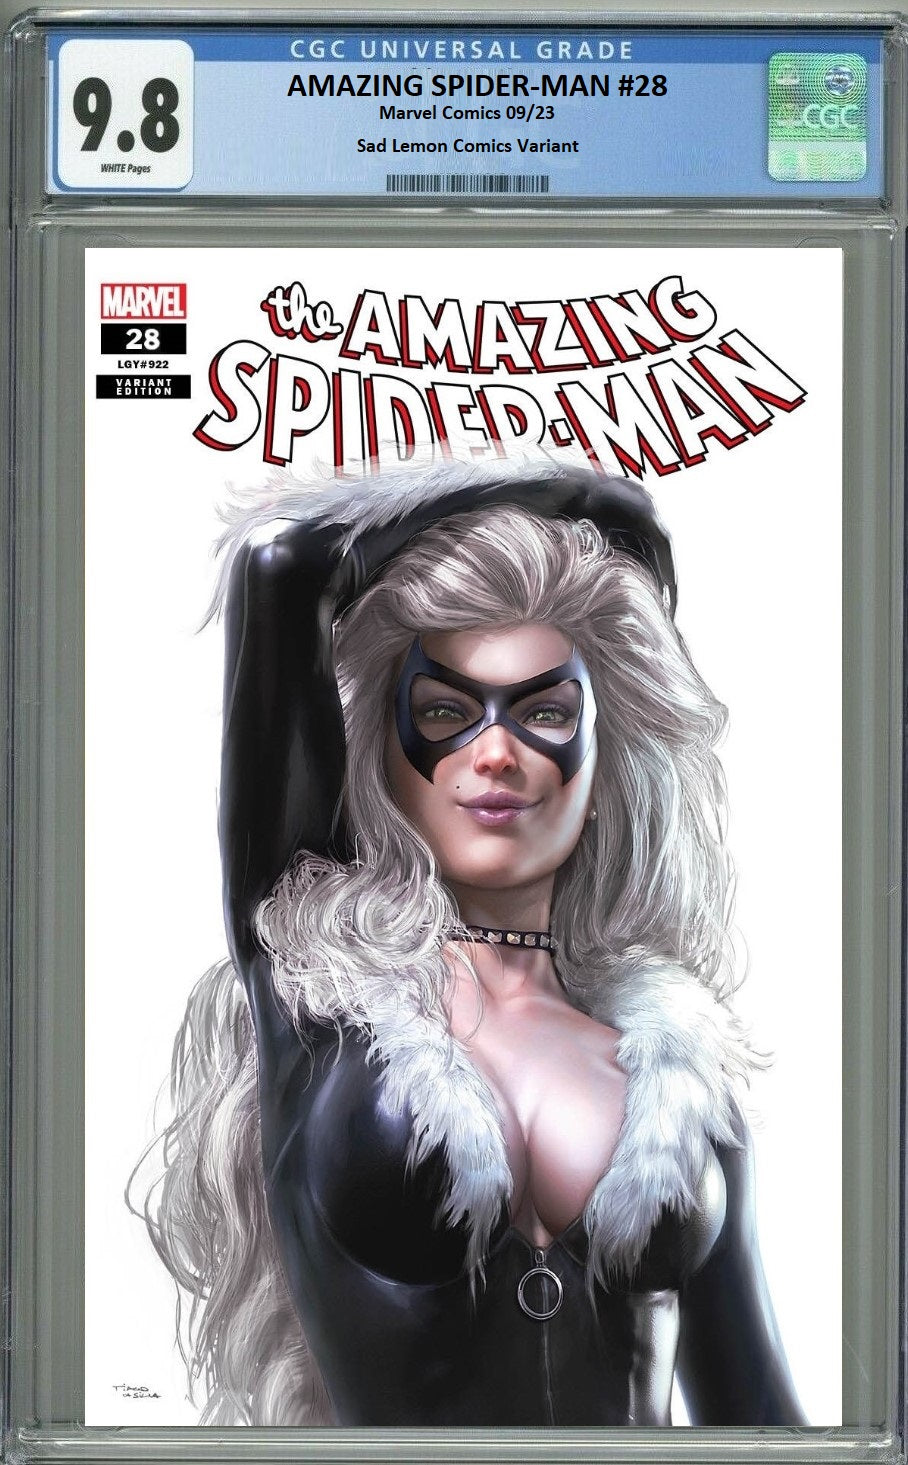 AMAZING SPIDER-MAN #28 TIAGO DA SILVA TRADE DRESS VARIANT LIMITED TO 800 COPIES WITH NUMBERED COA CGC 9.8 PREORDER